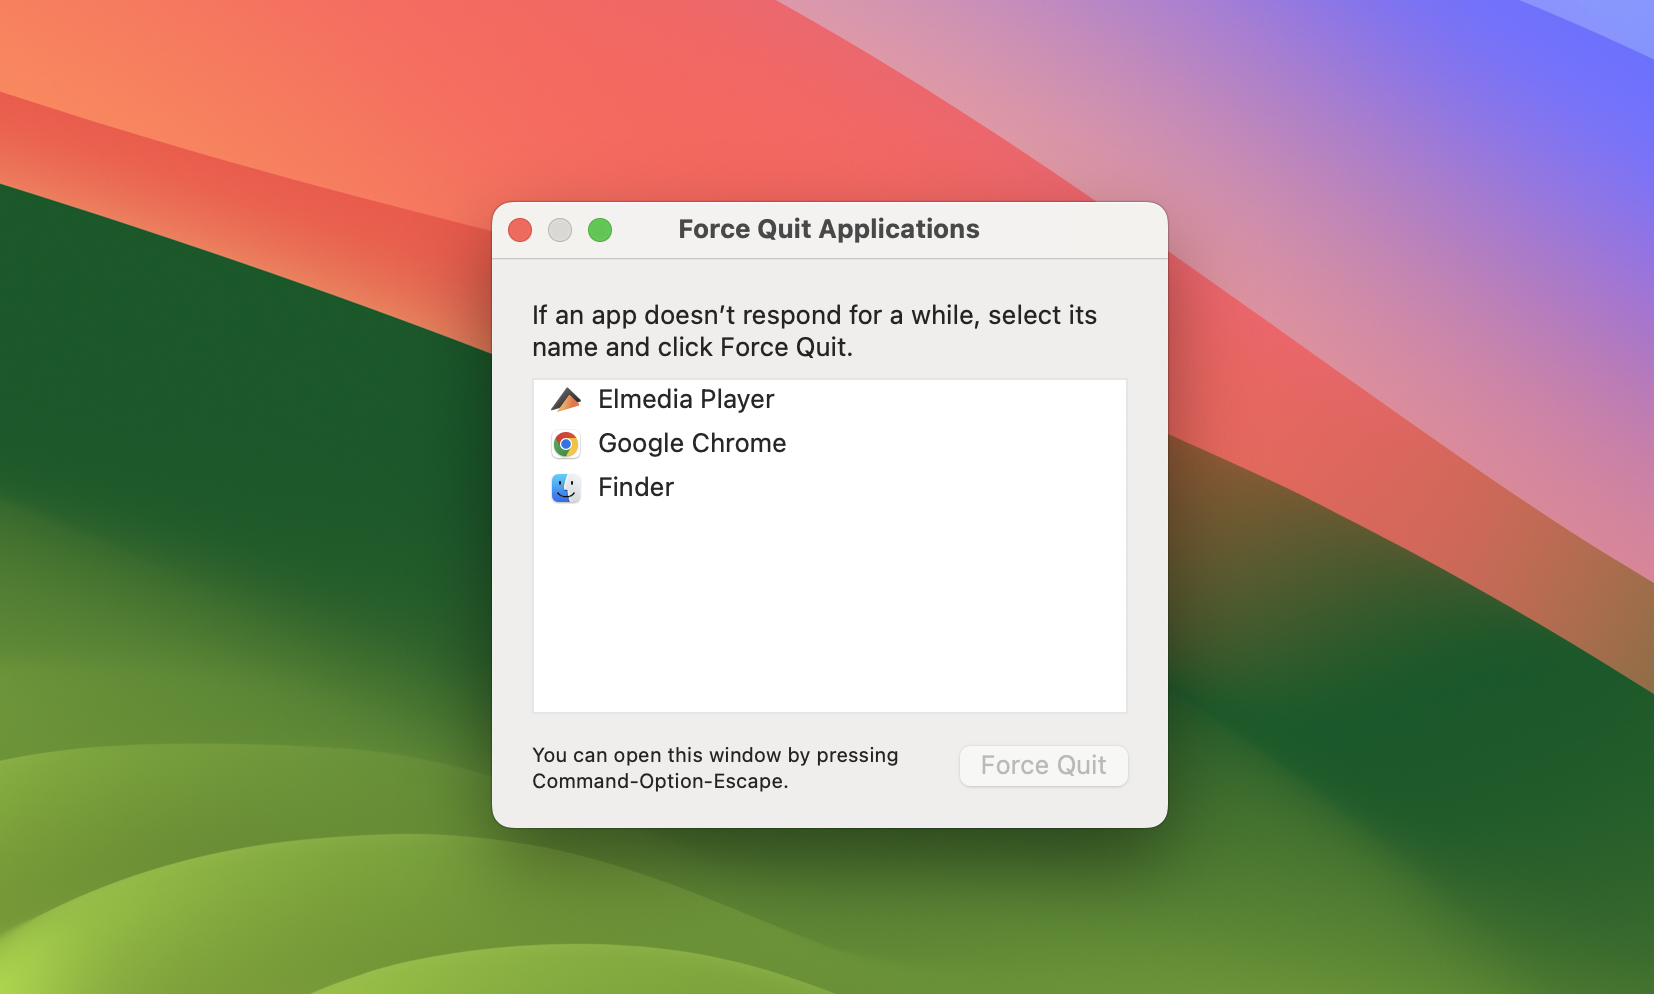 The Force Quit Application window is demonstrated